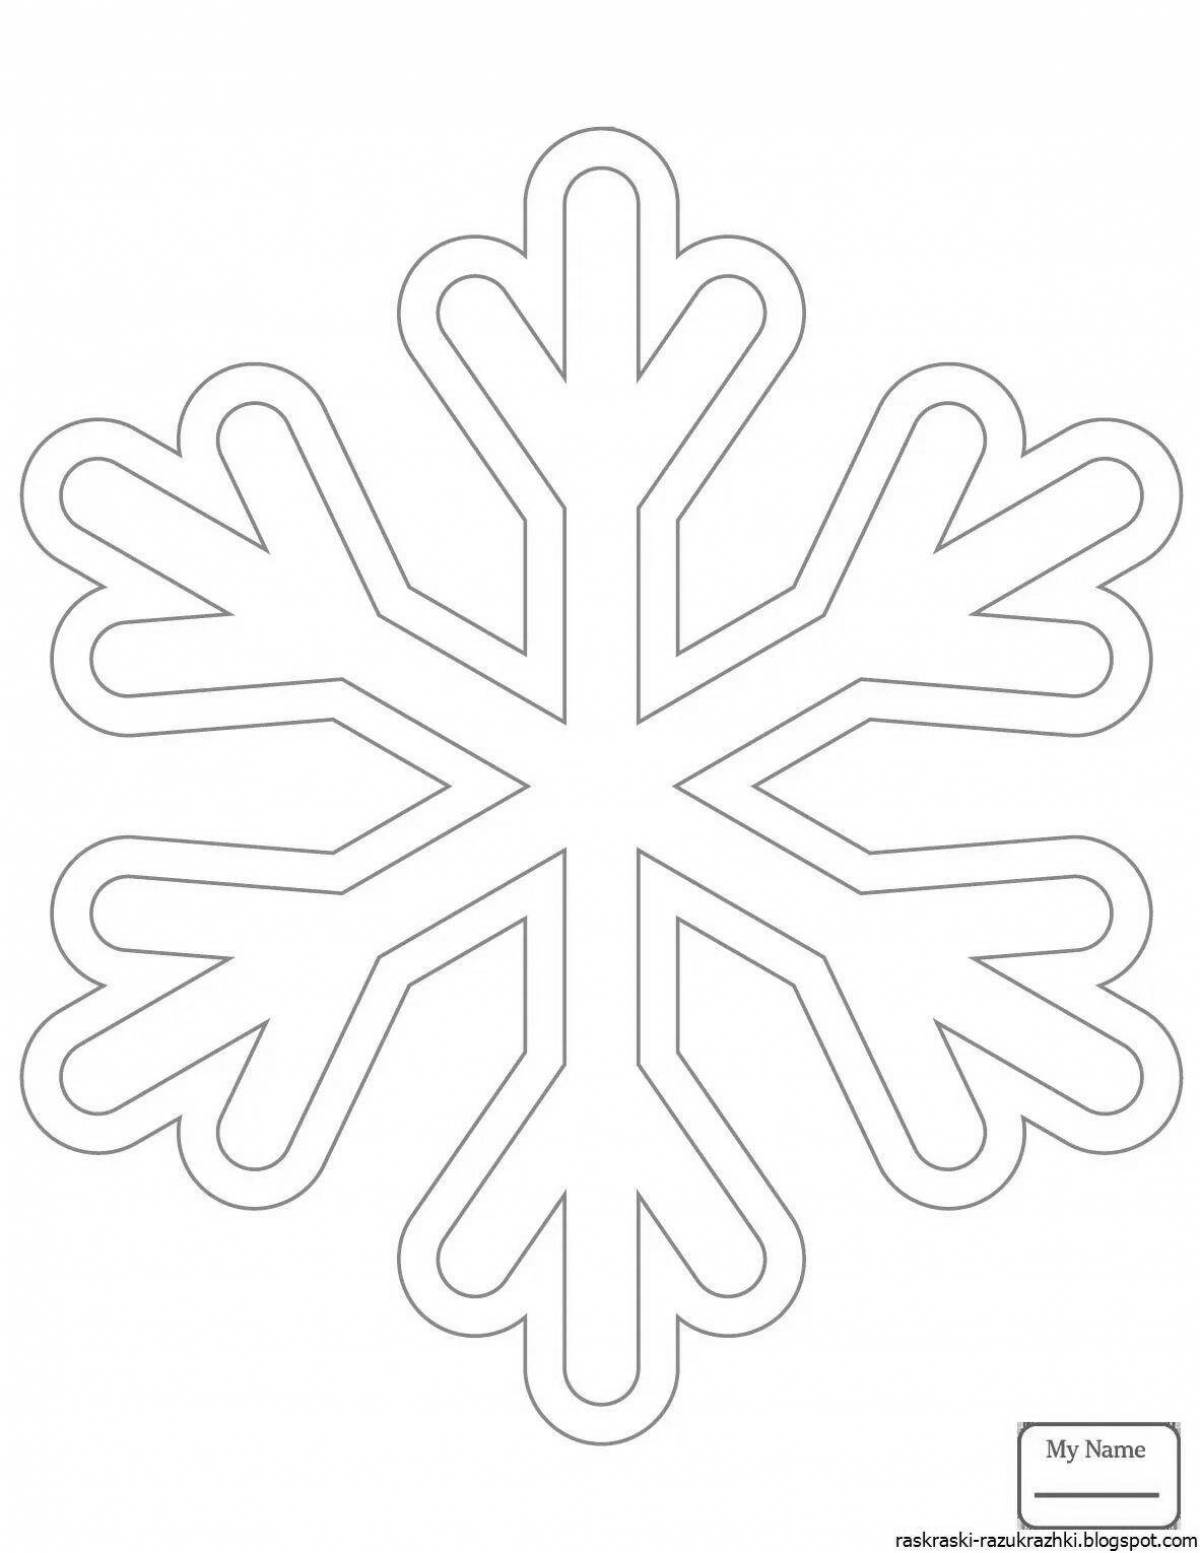 Whimsical snowflake coloring for kids